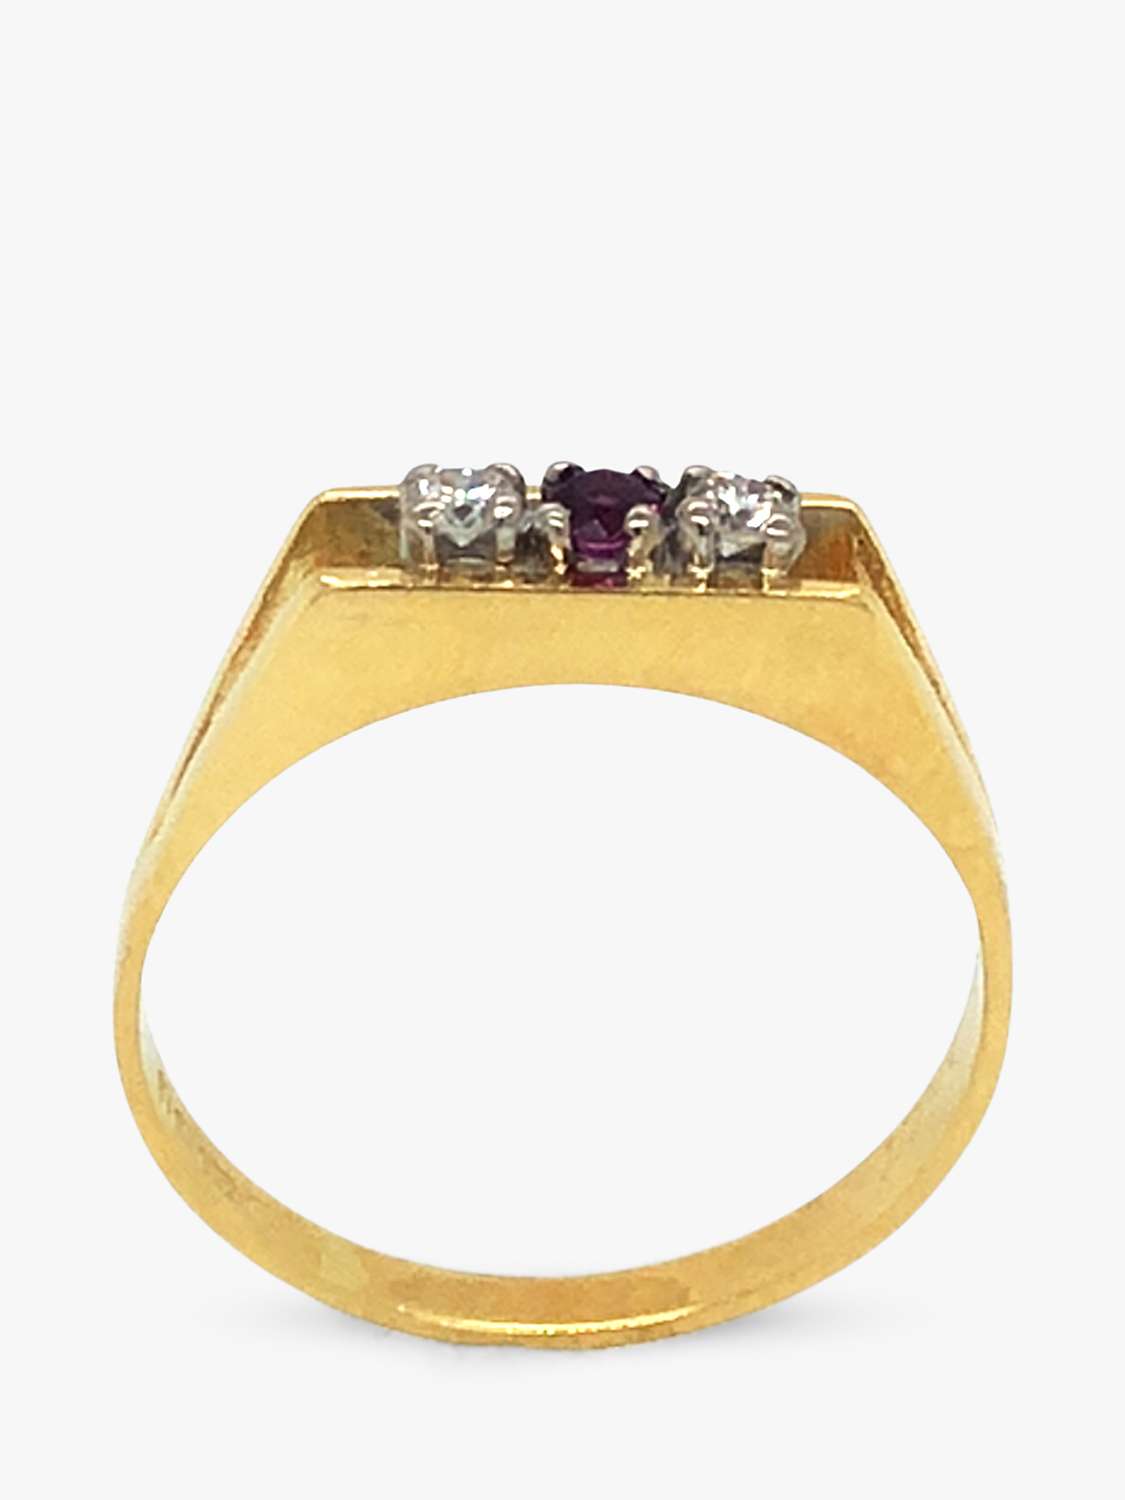 Buy VF Jewellery 18ct White & Yellow Gold Diamond & Ruby Second Hand Bar Ring Online at johnlewis.com